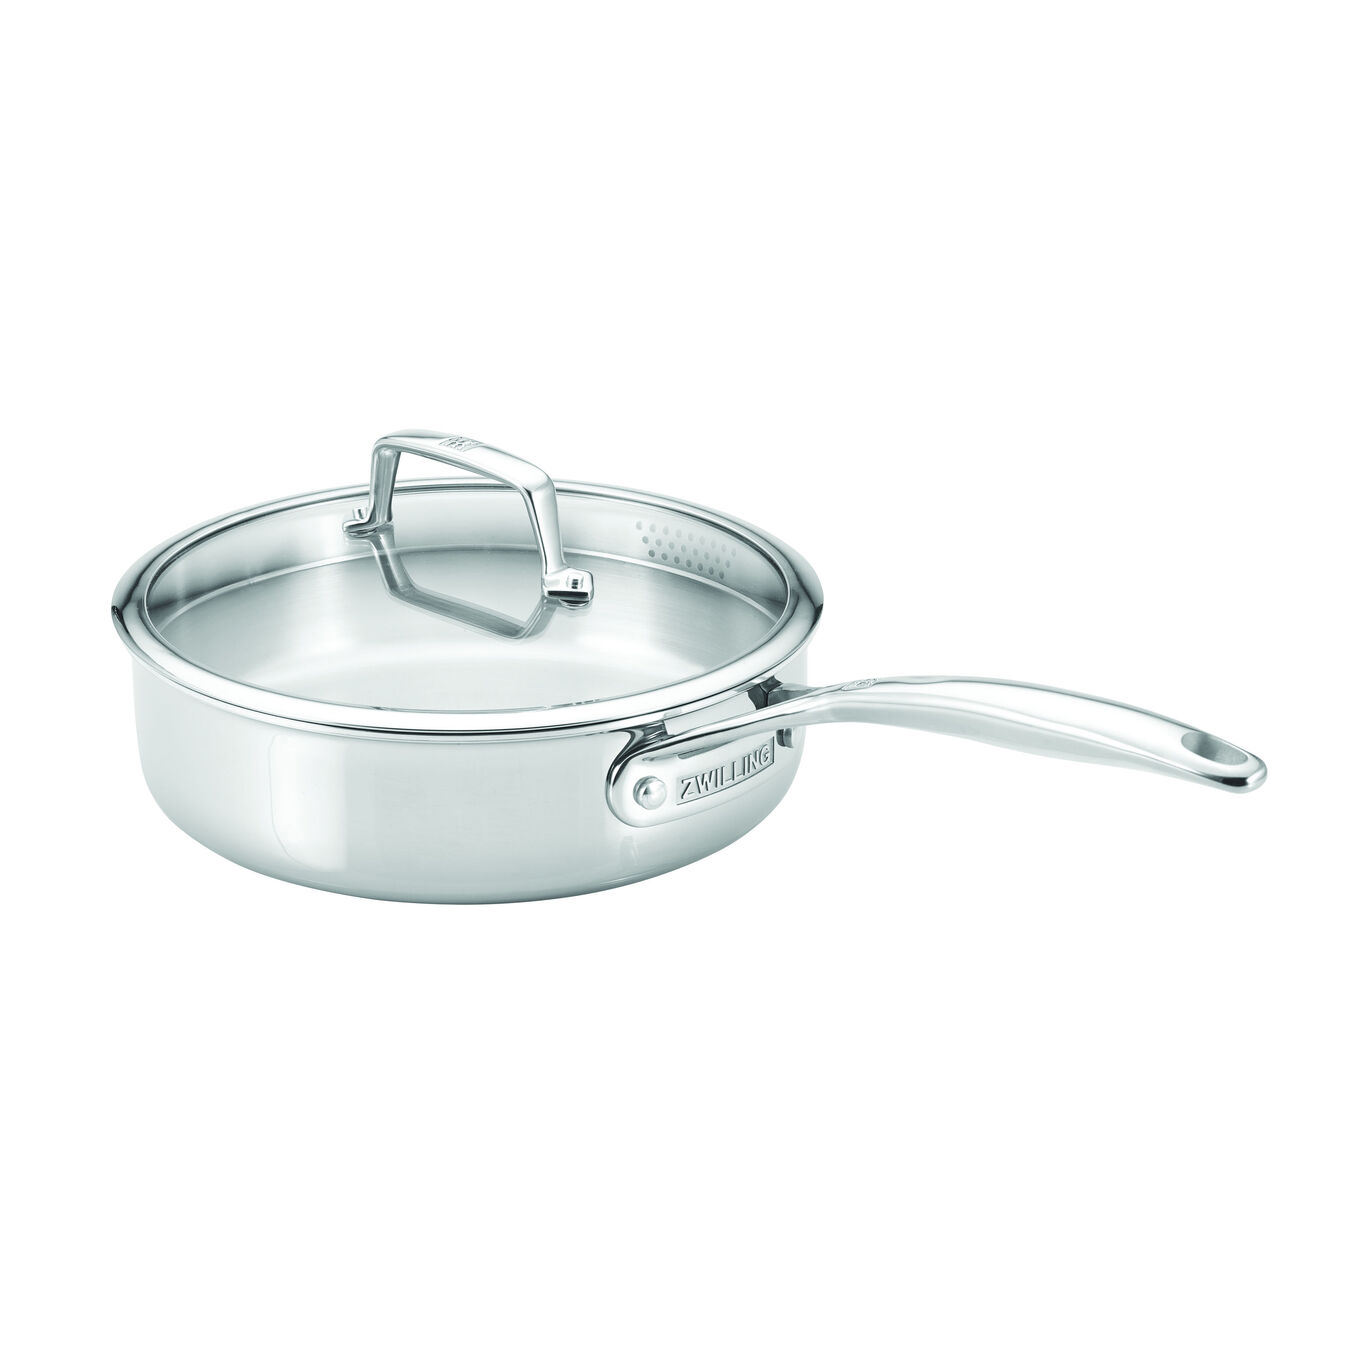 24 cm 18/10 Stainless Steel Saute pan,,large 1